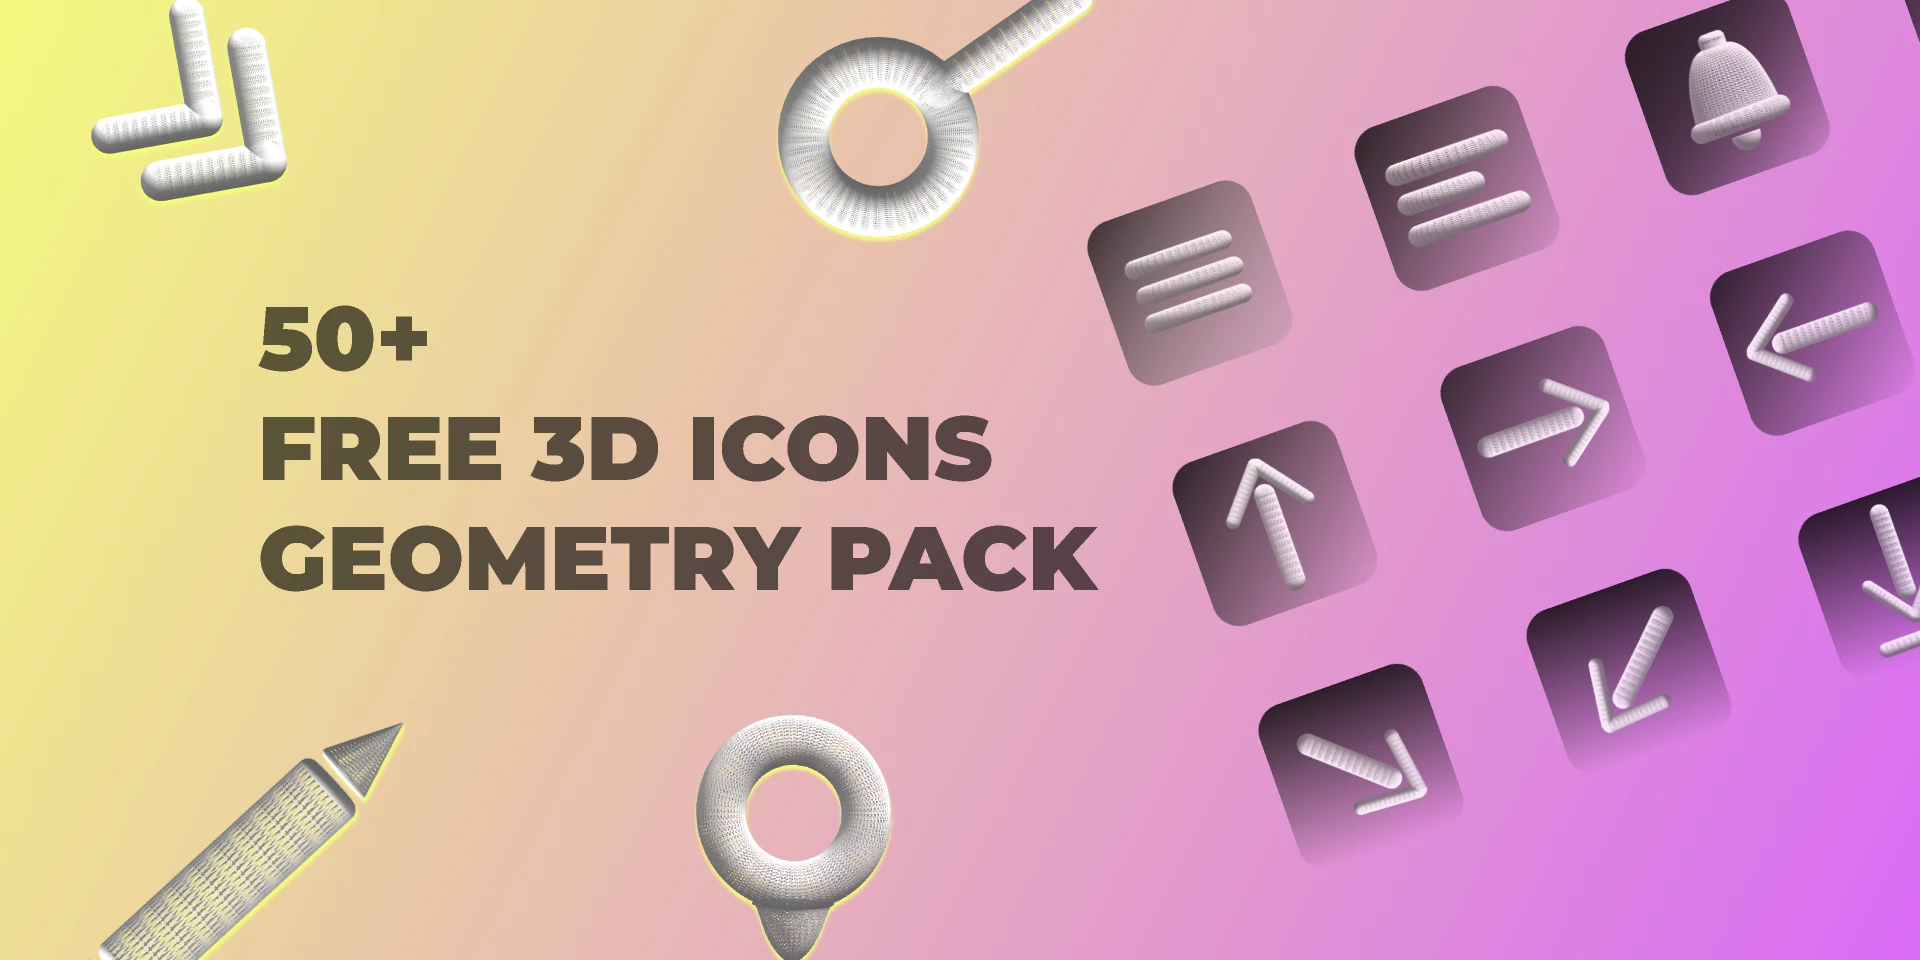 3D ICONS GEOMETRY PACK for Figma and Adobe XD